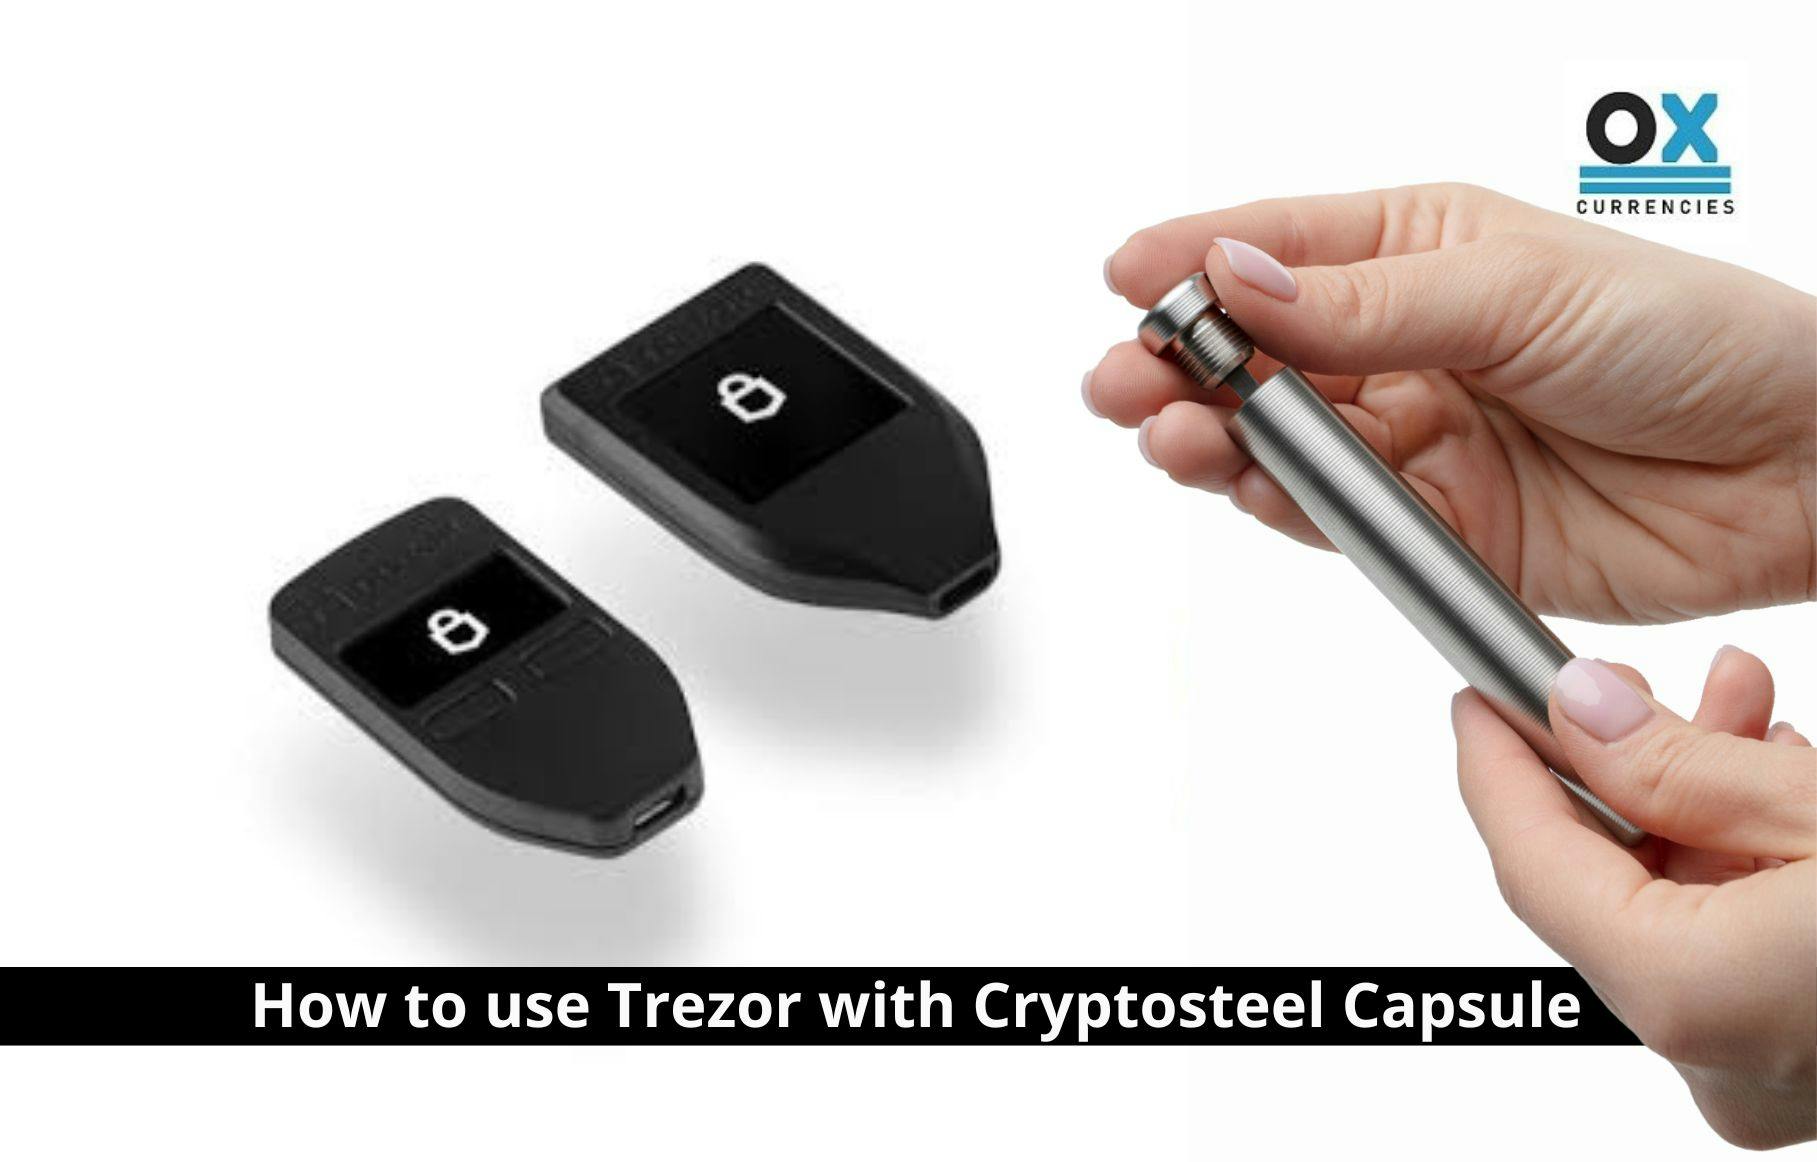 How to use Trezor with Cryptosteel Capsule